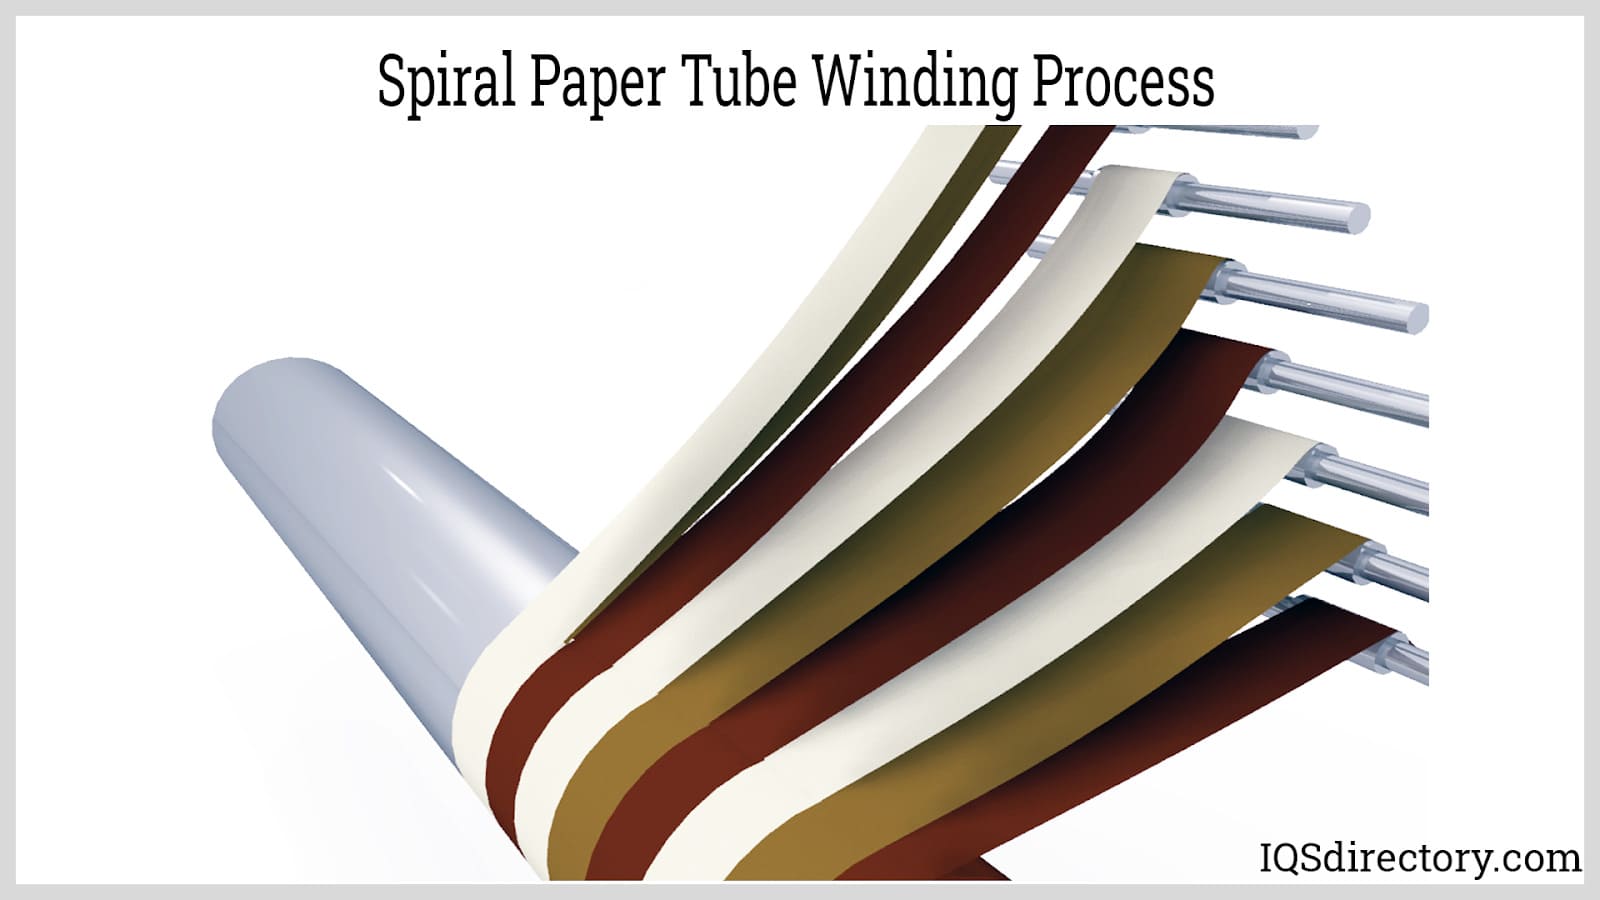 Spiral Paper Tube Winding Process